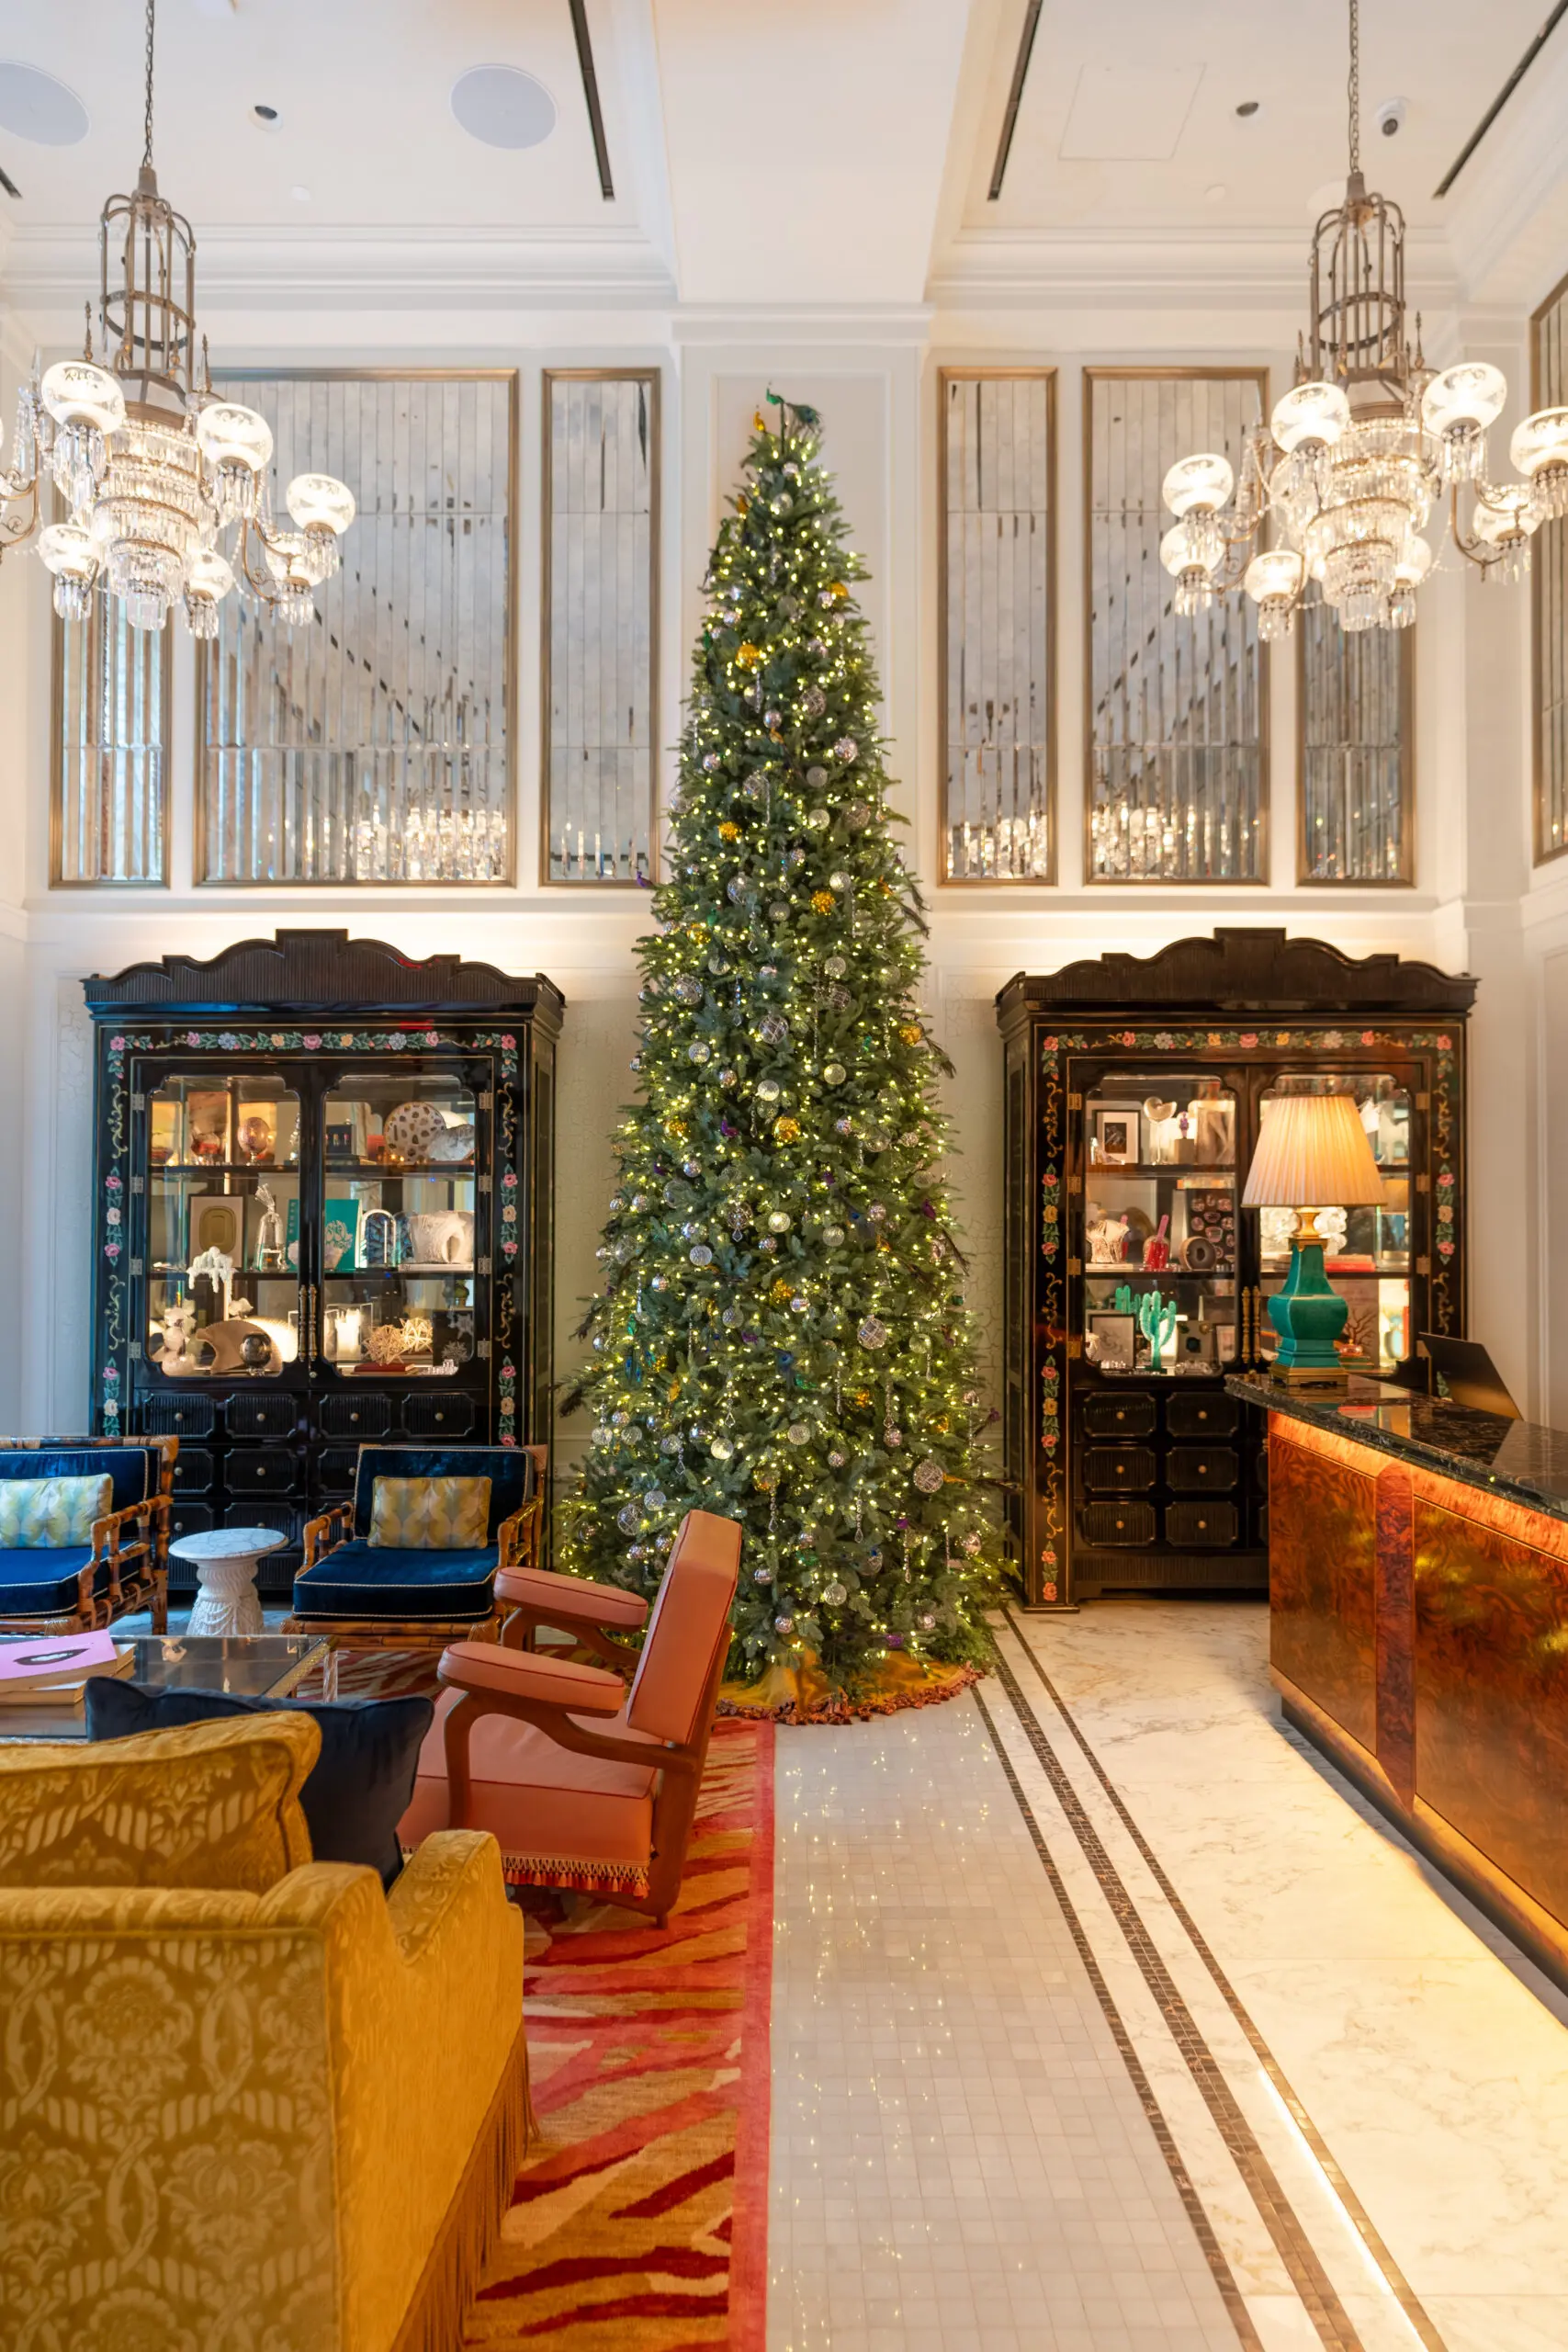 Christmas tree decorations at the Fifth Avenue Hotel: a festive display of ornaments and lights.